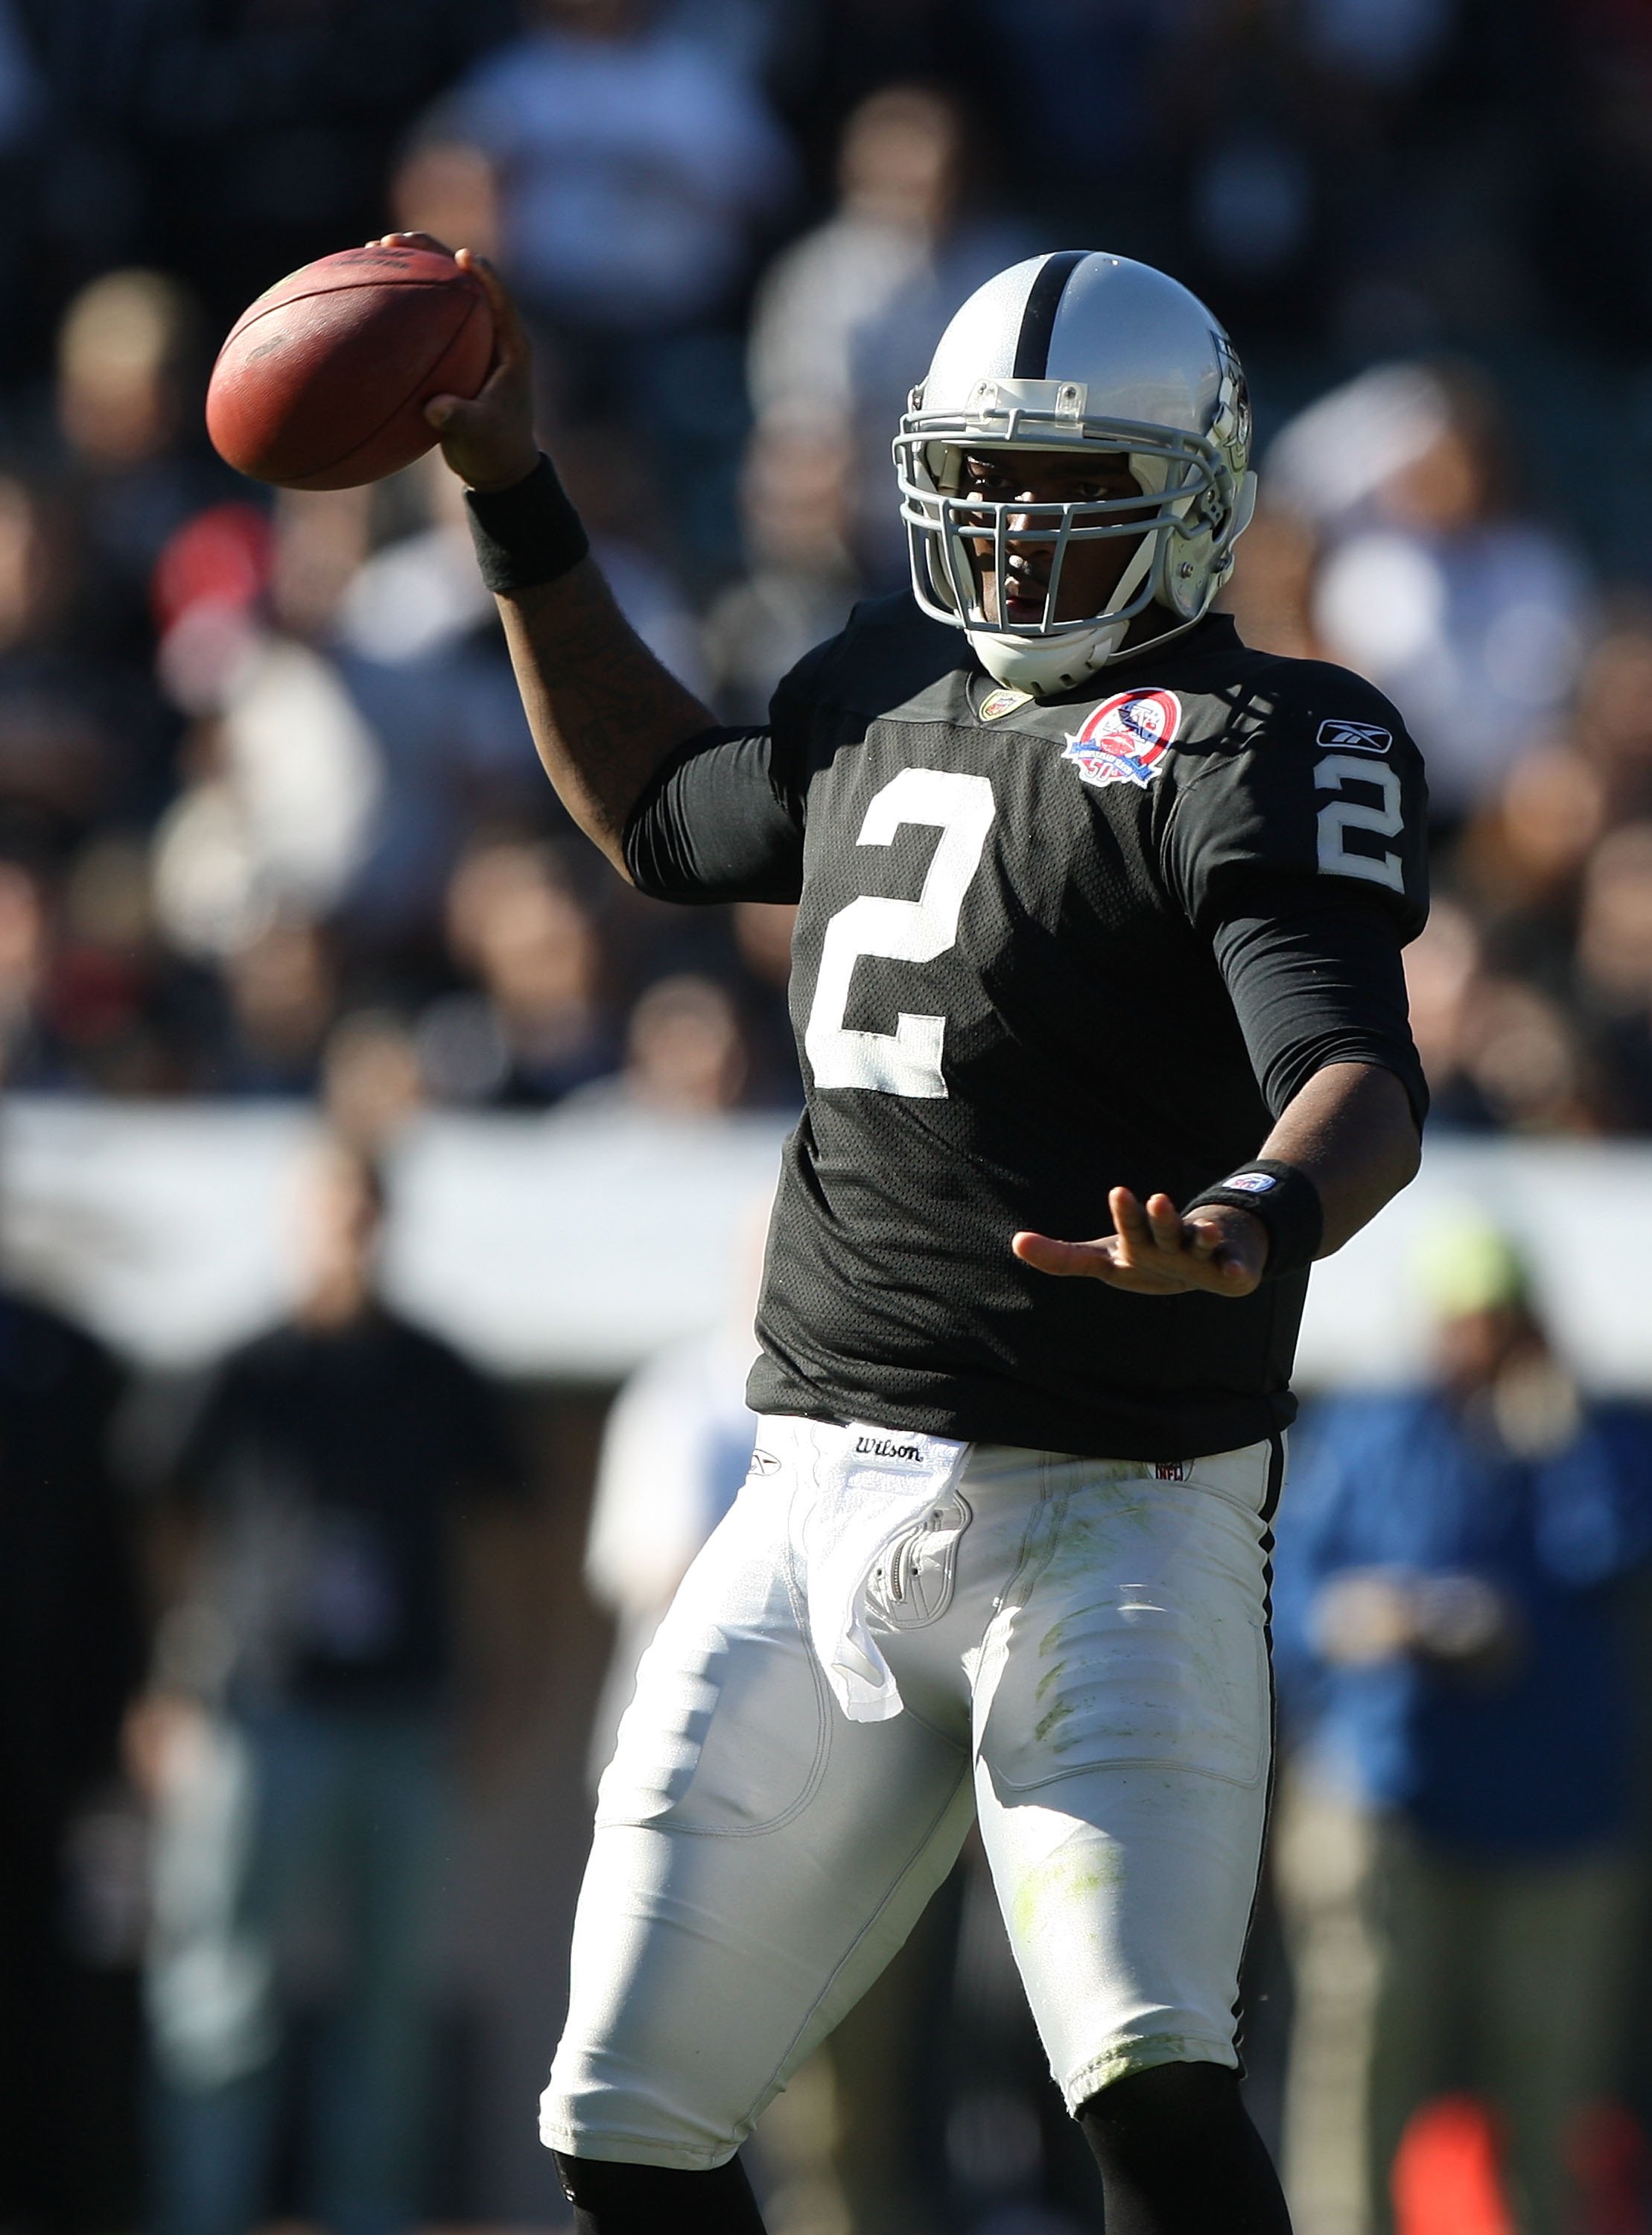 JaMarcus Russell: Why Are Teams Interested in This Overweight